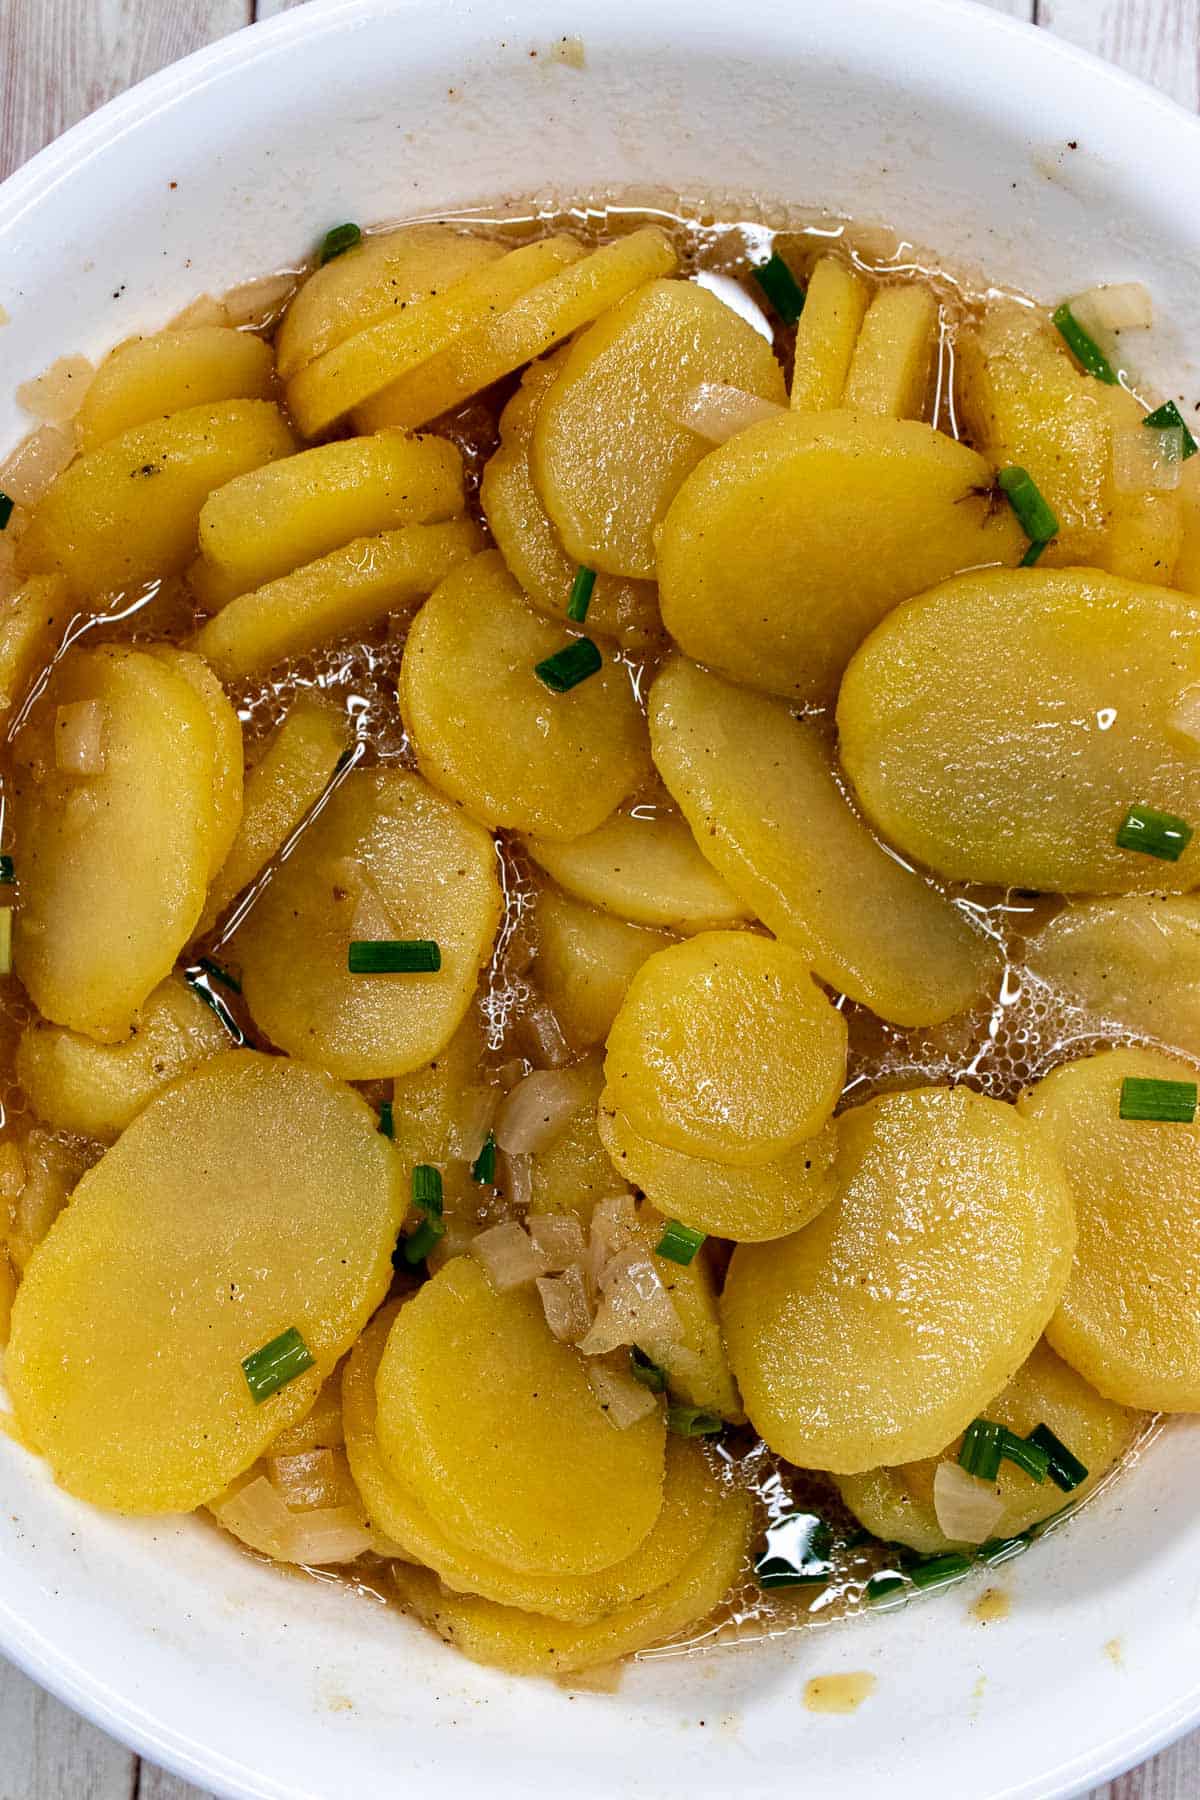 Marinated potatoes for Swabian potato salad tossed with oil and chives.